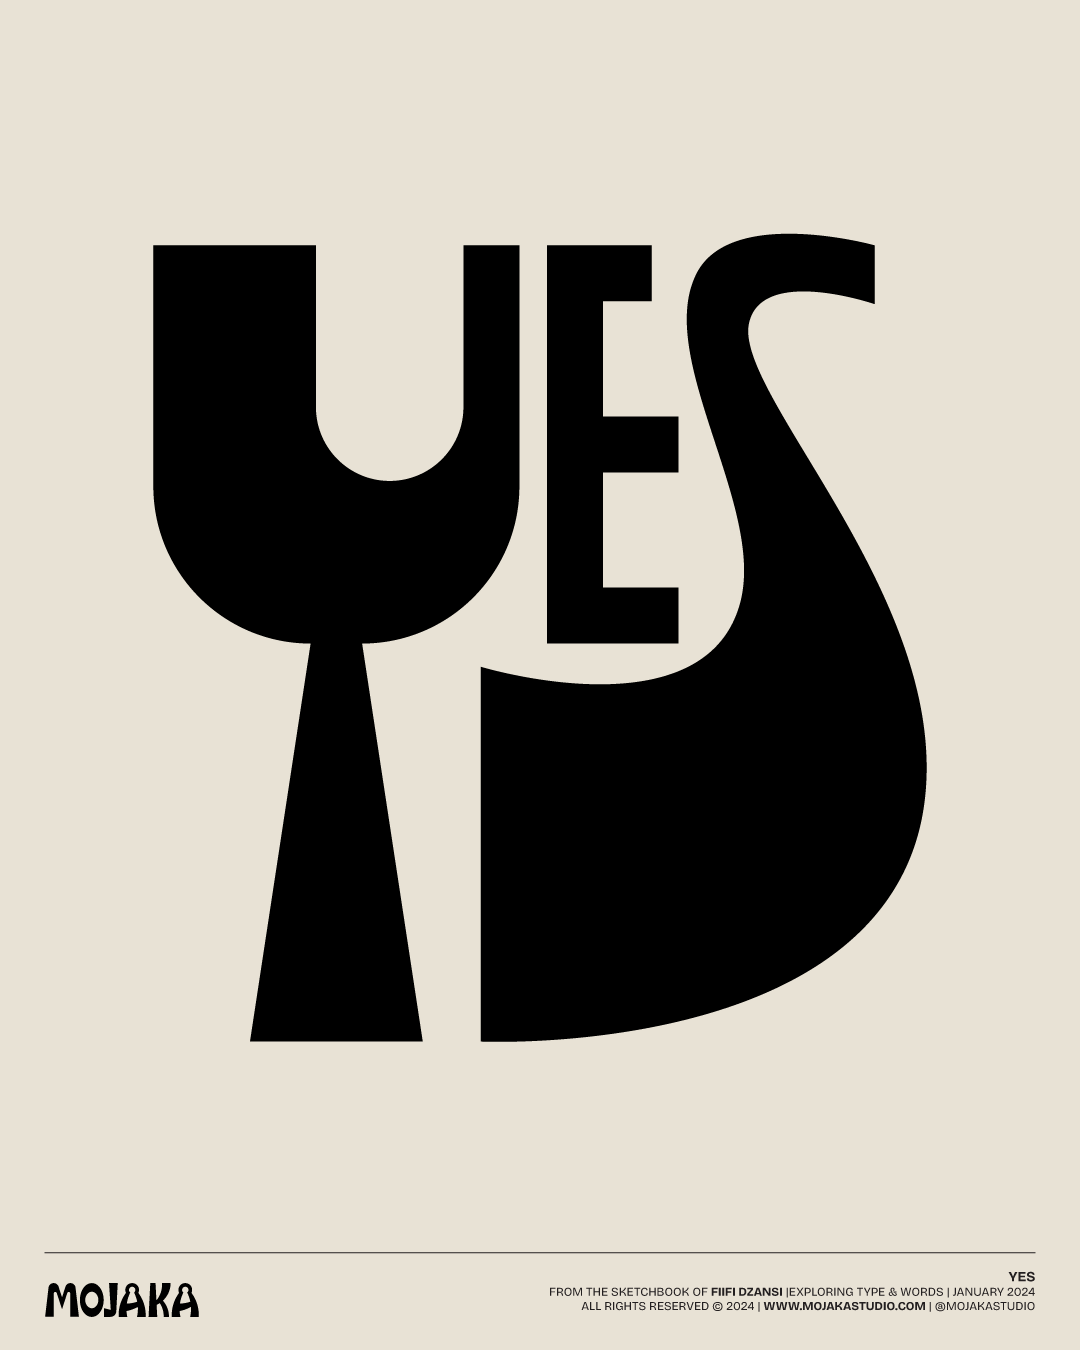 Yes type design in black.